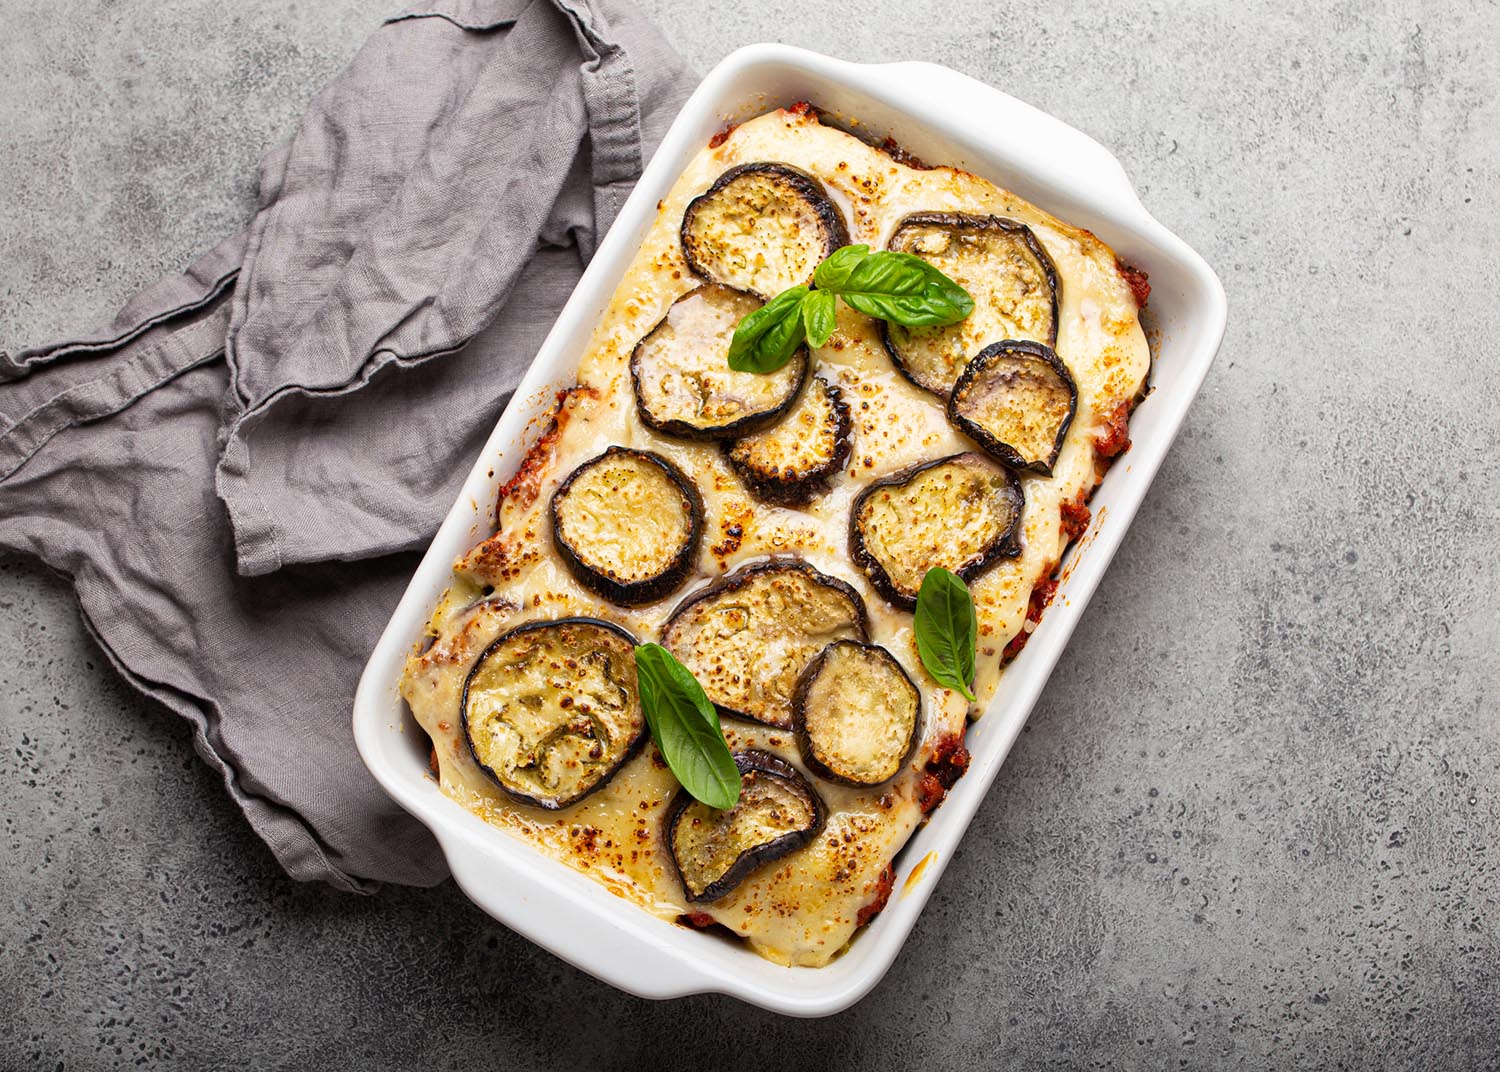 Greek mediterranean dish Moussaka with baked eggplants, ground beef in white ceramic casserole on rustic stone background from above, traditional dish of Greece